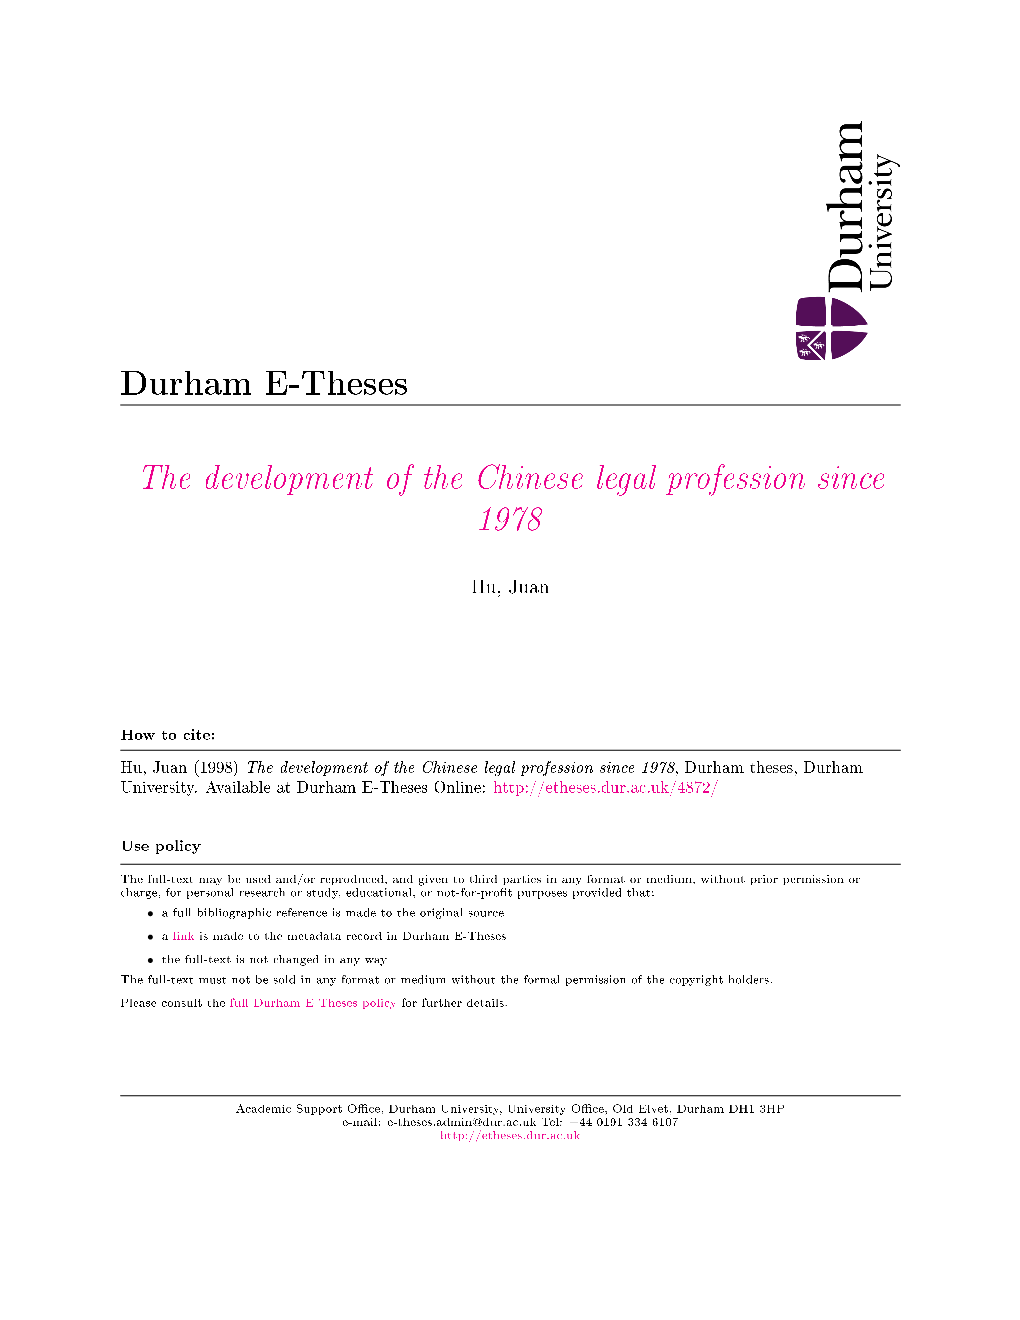 The Development of the Chinese Legal Profession Since 1978